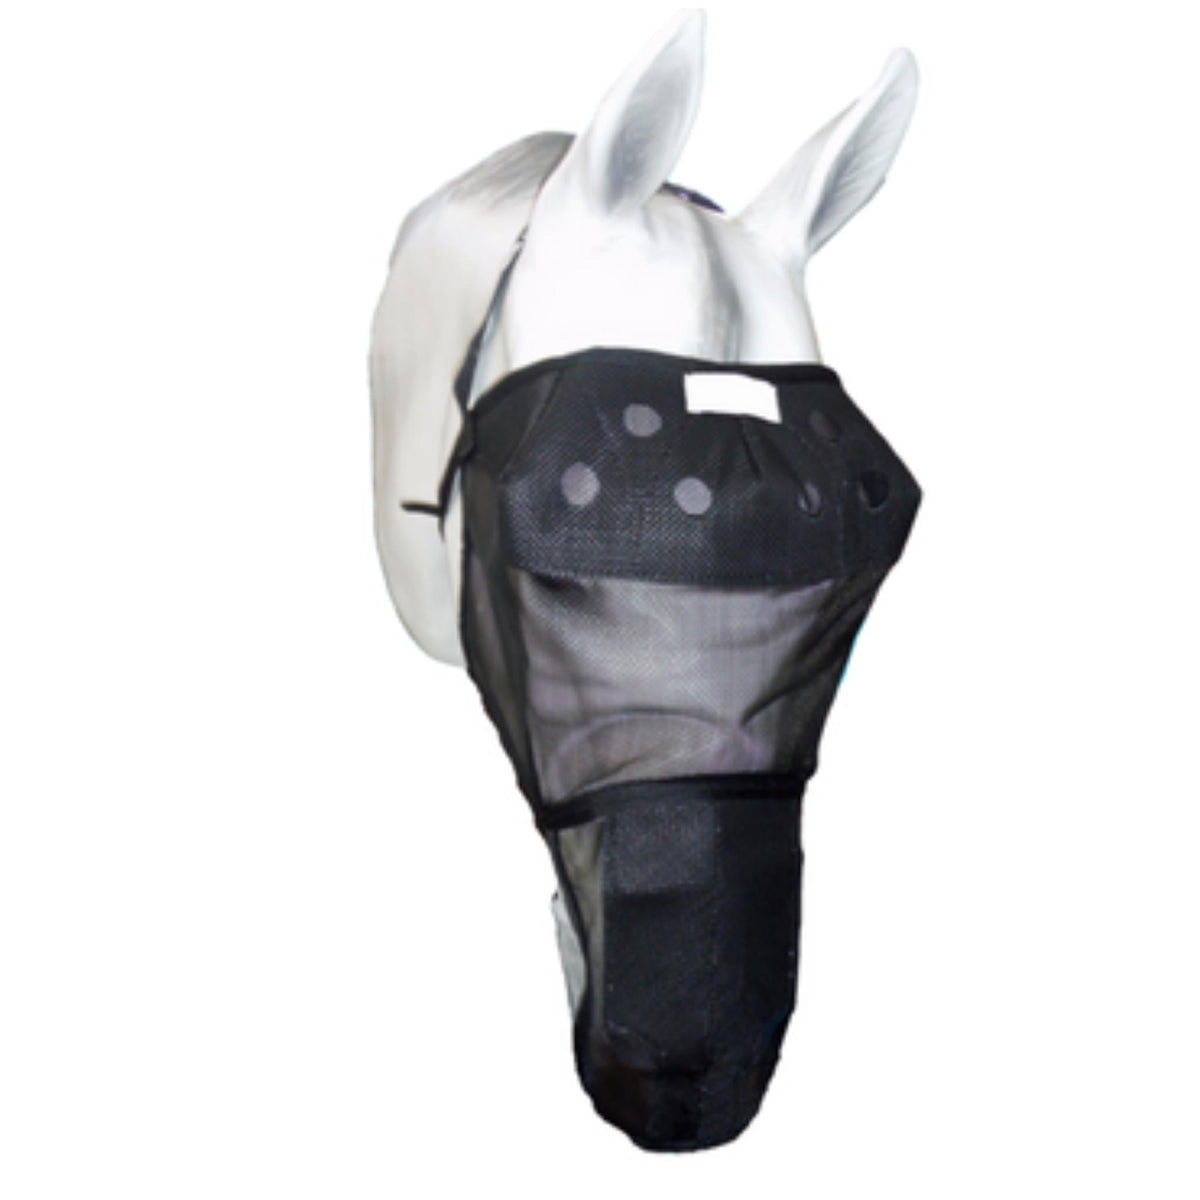 Horse head model wearing black fly mask with nose covering.